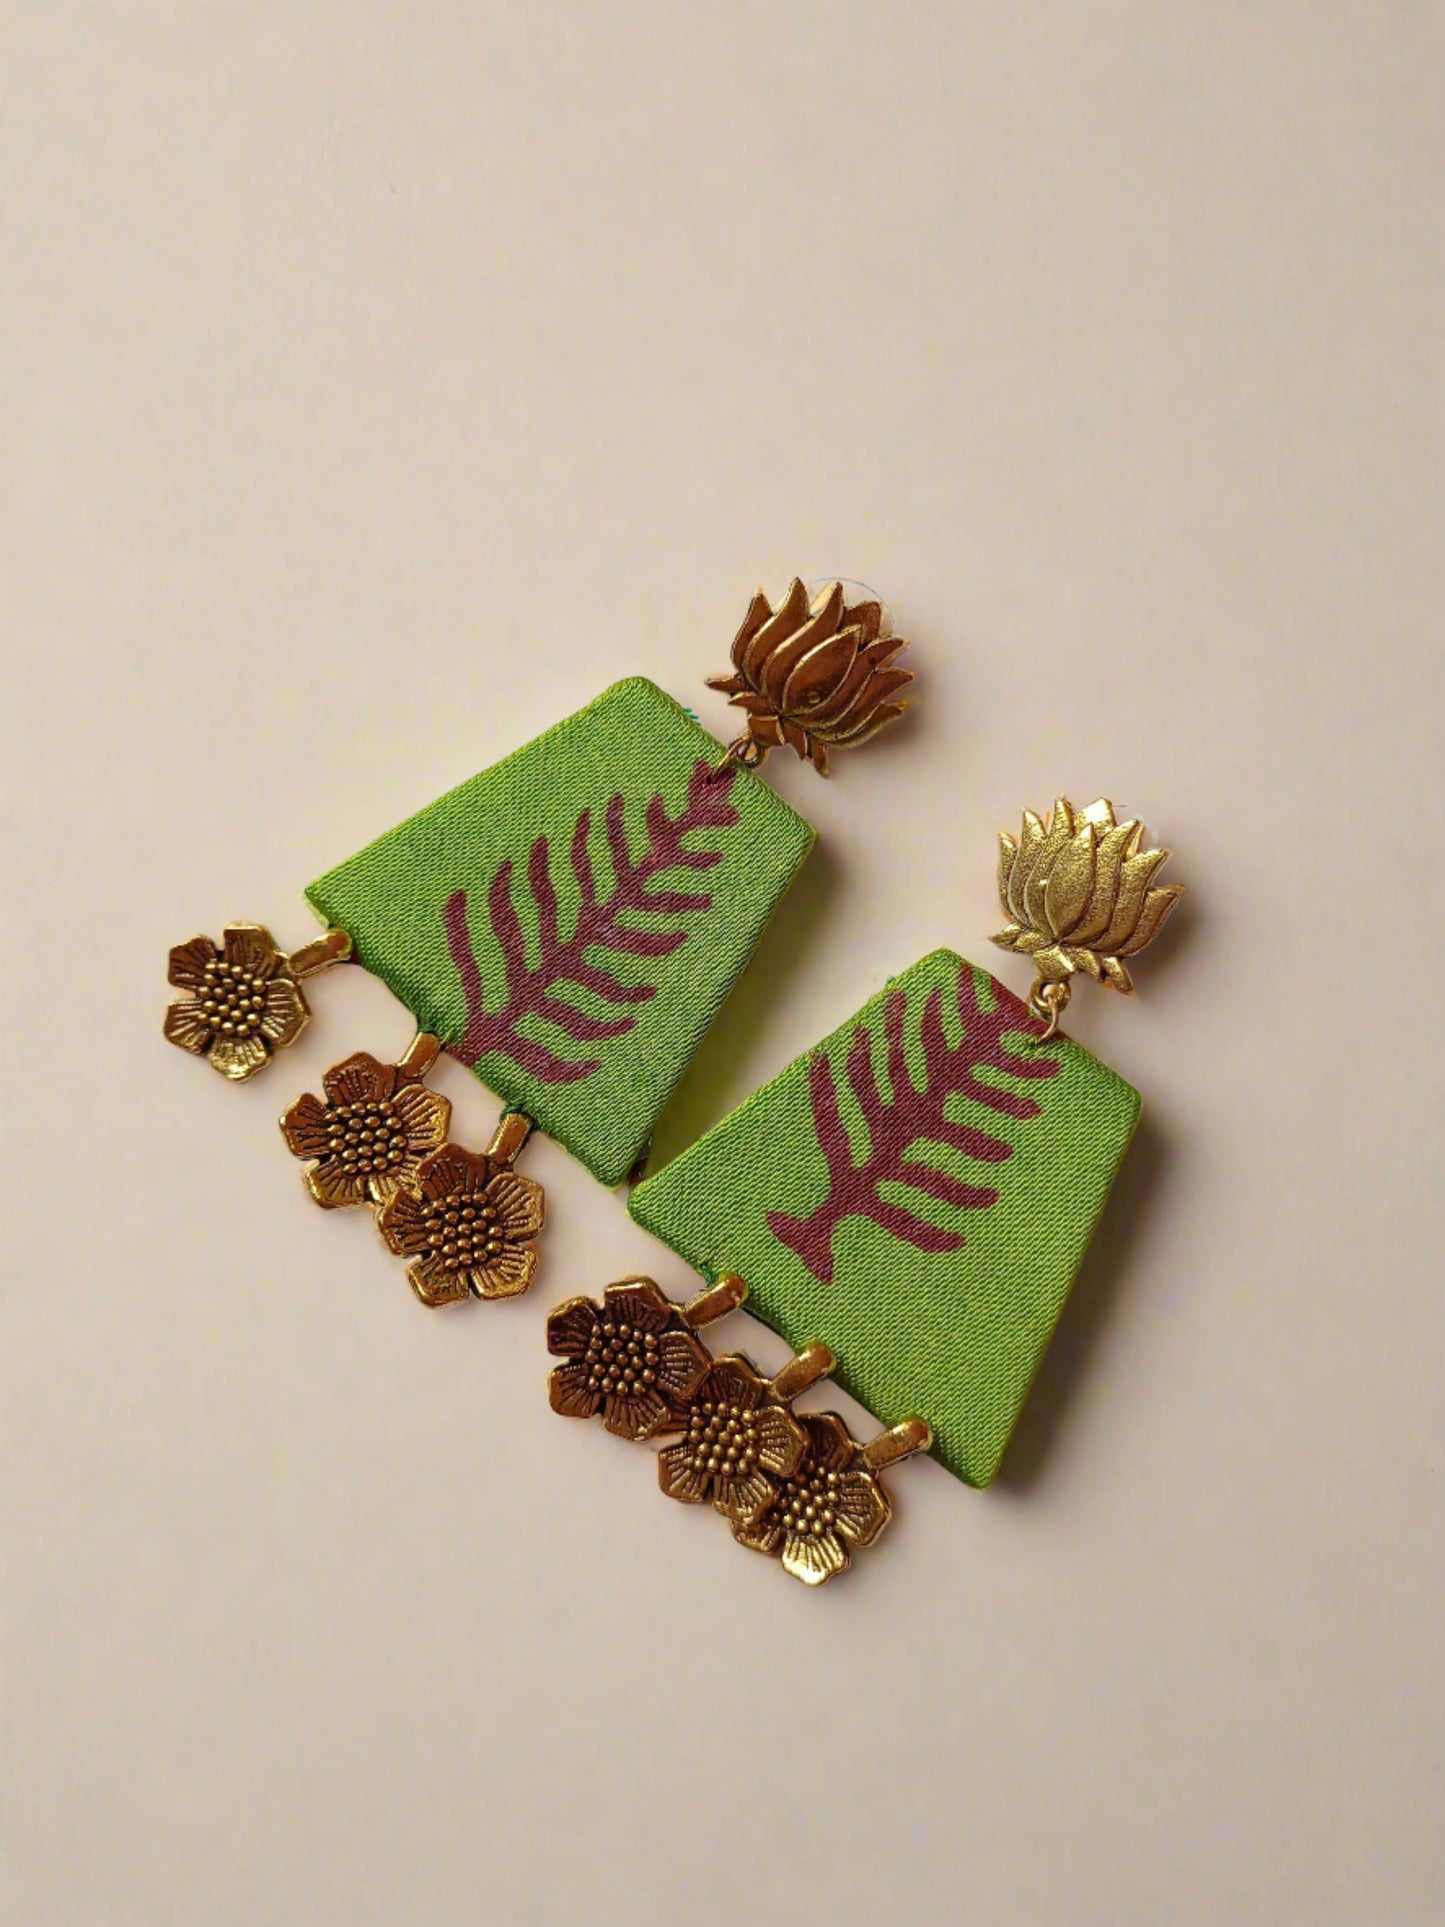 Green printed jhumka earrings with golden top in lotus shape and floral golden bottom on white backdrop